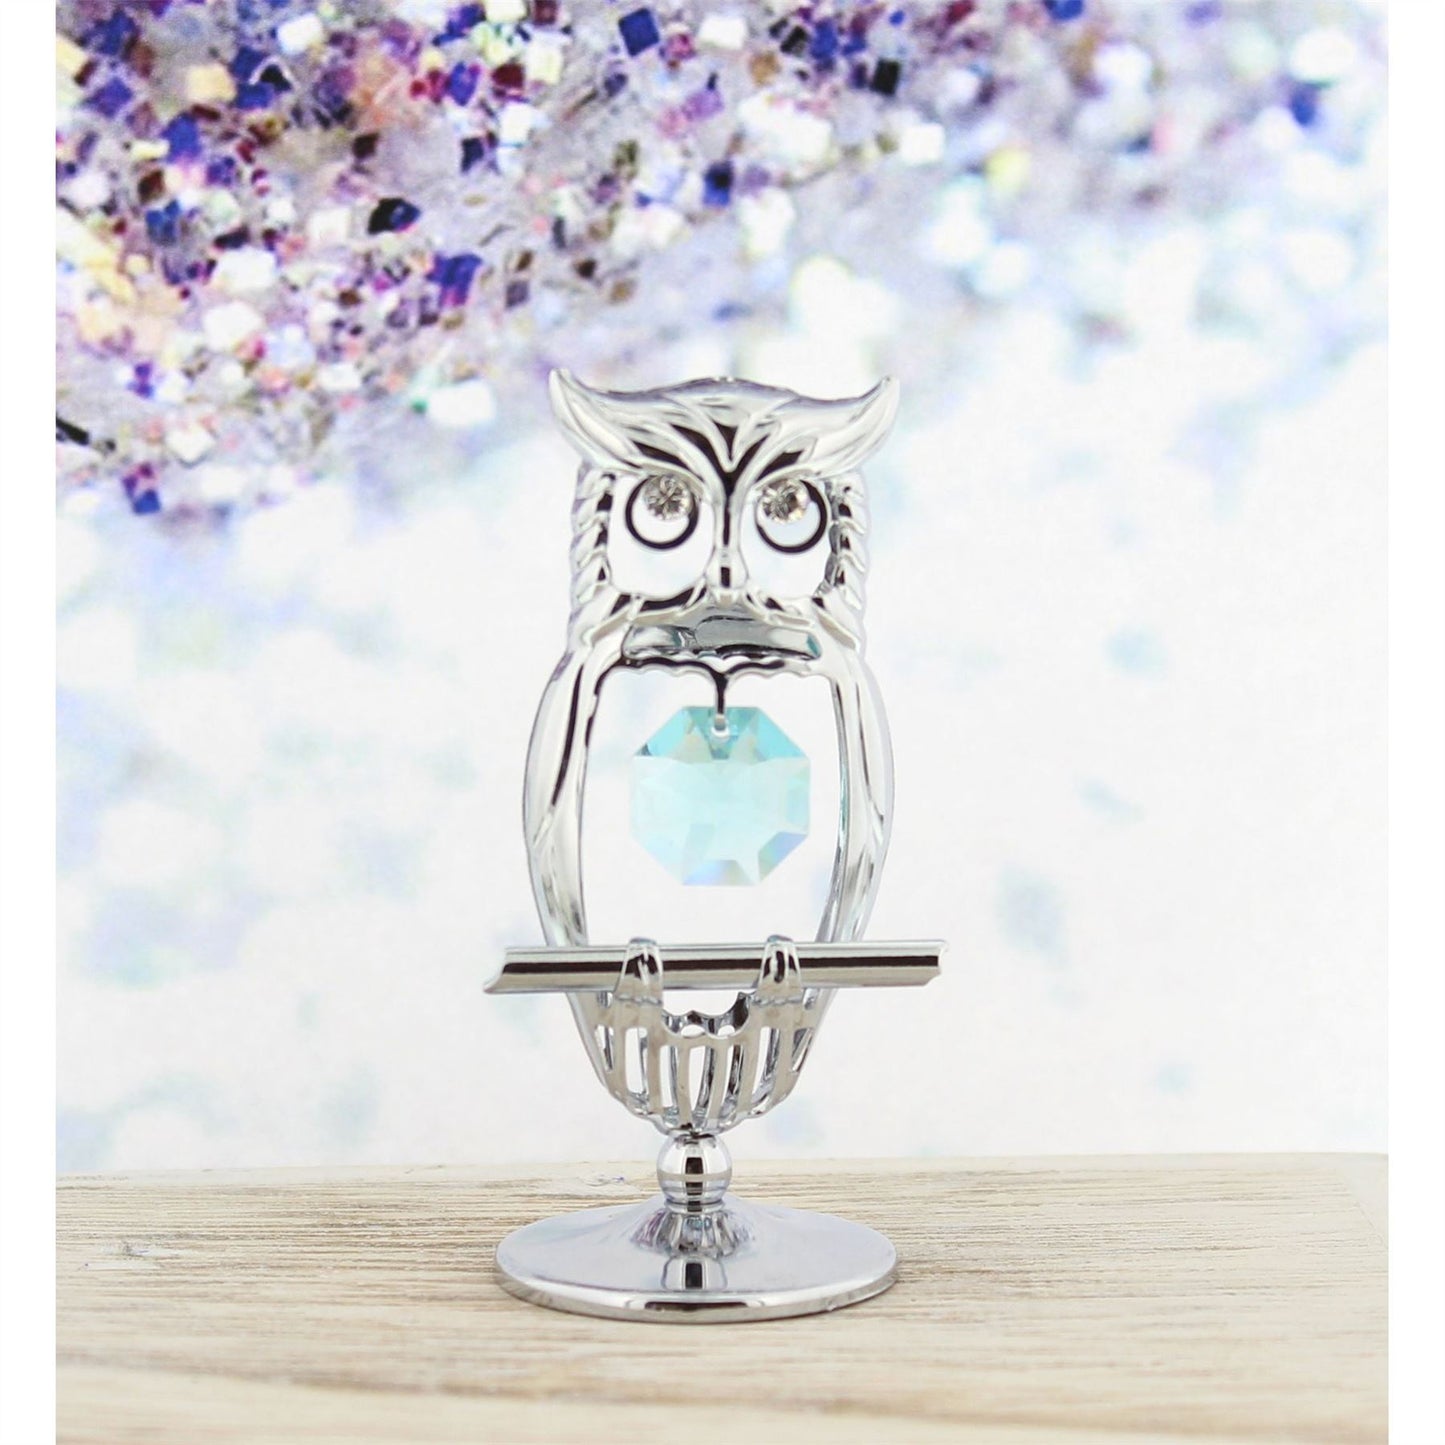 Crystocraft Chrome Plated Owl Ornament With Crystal